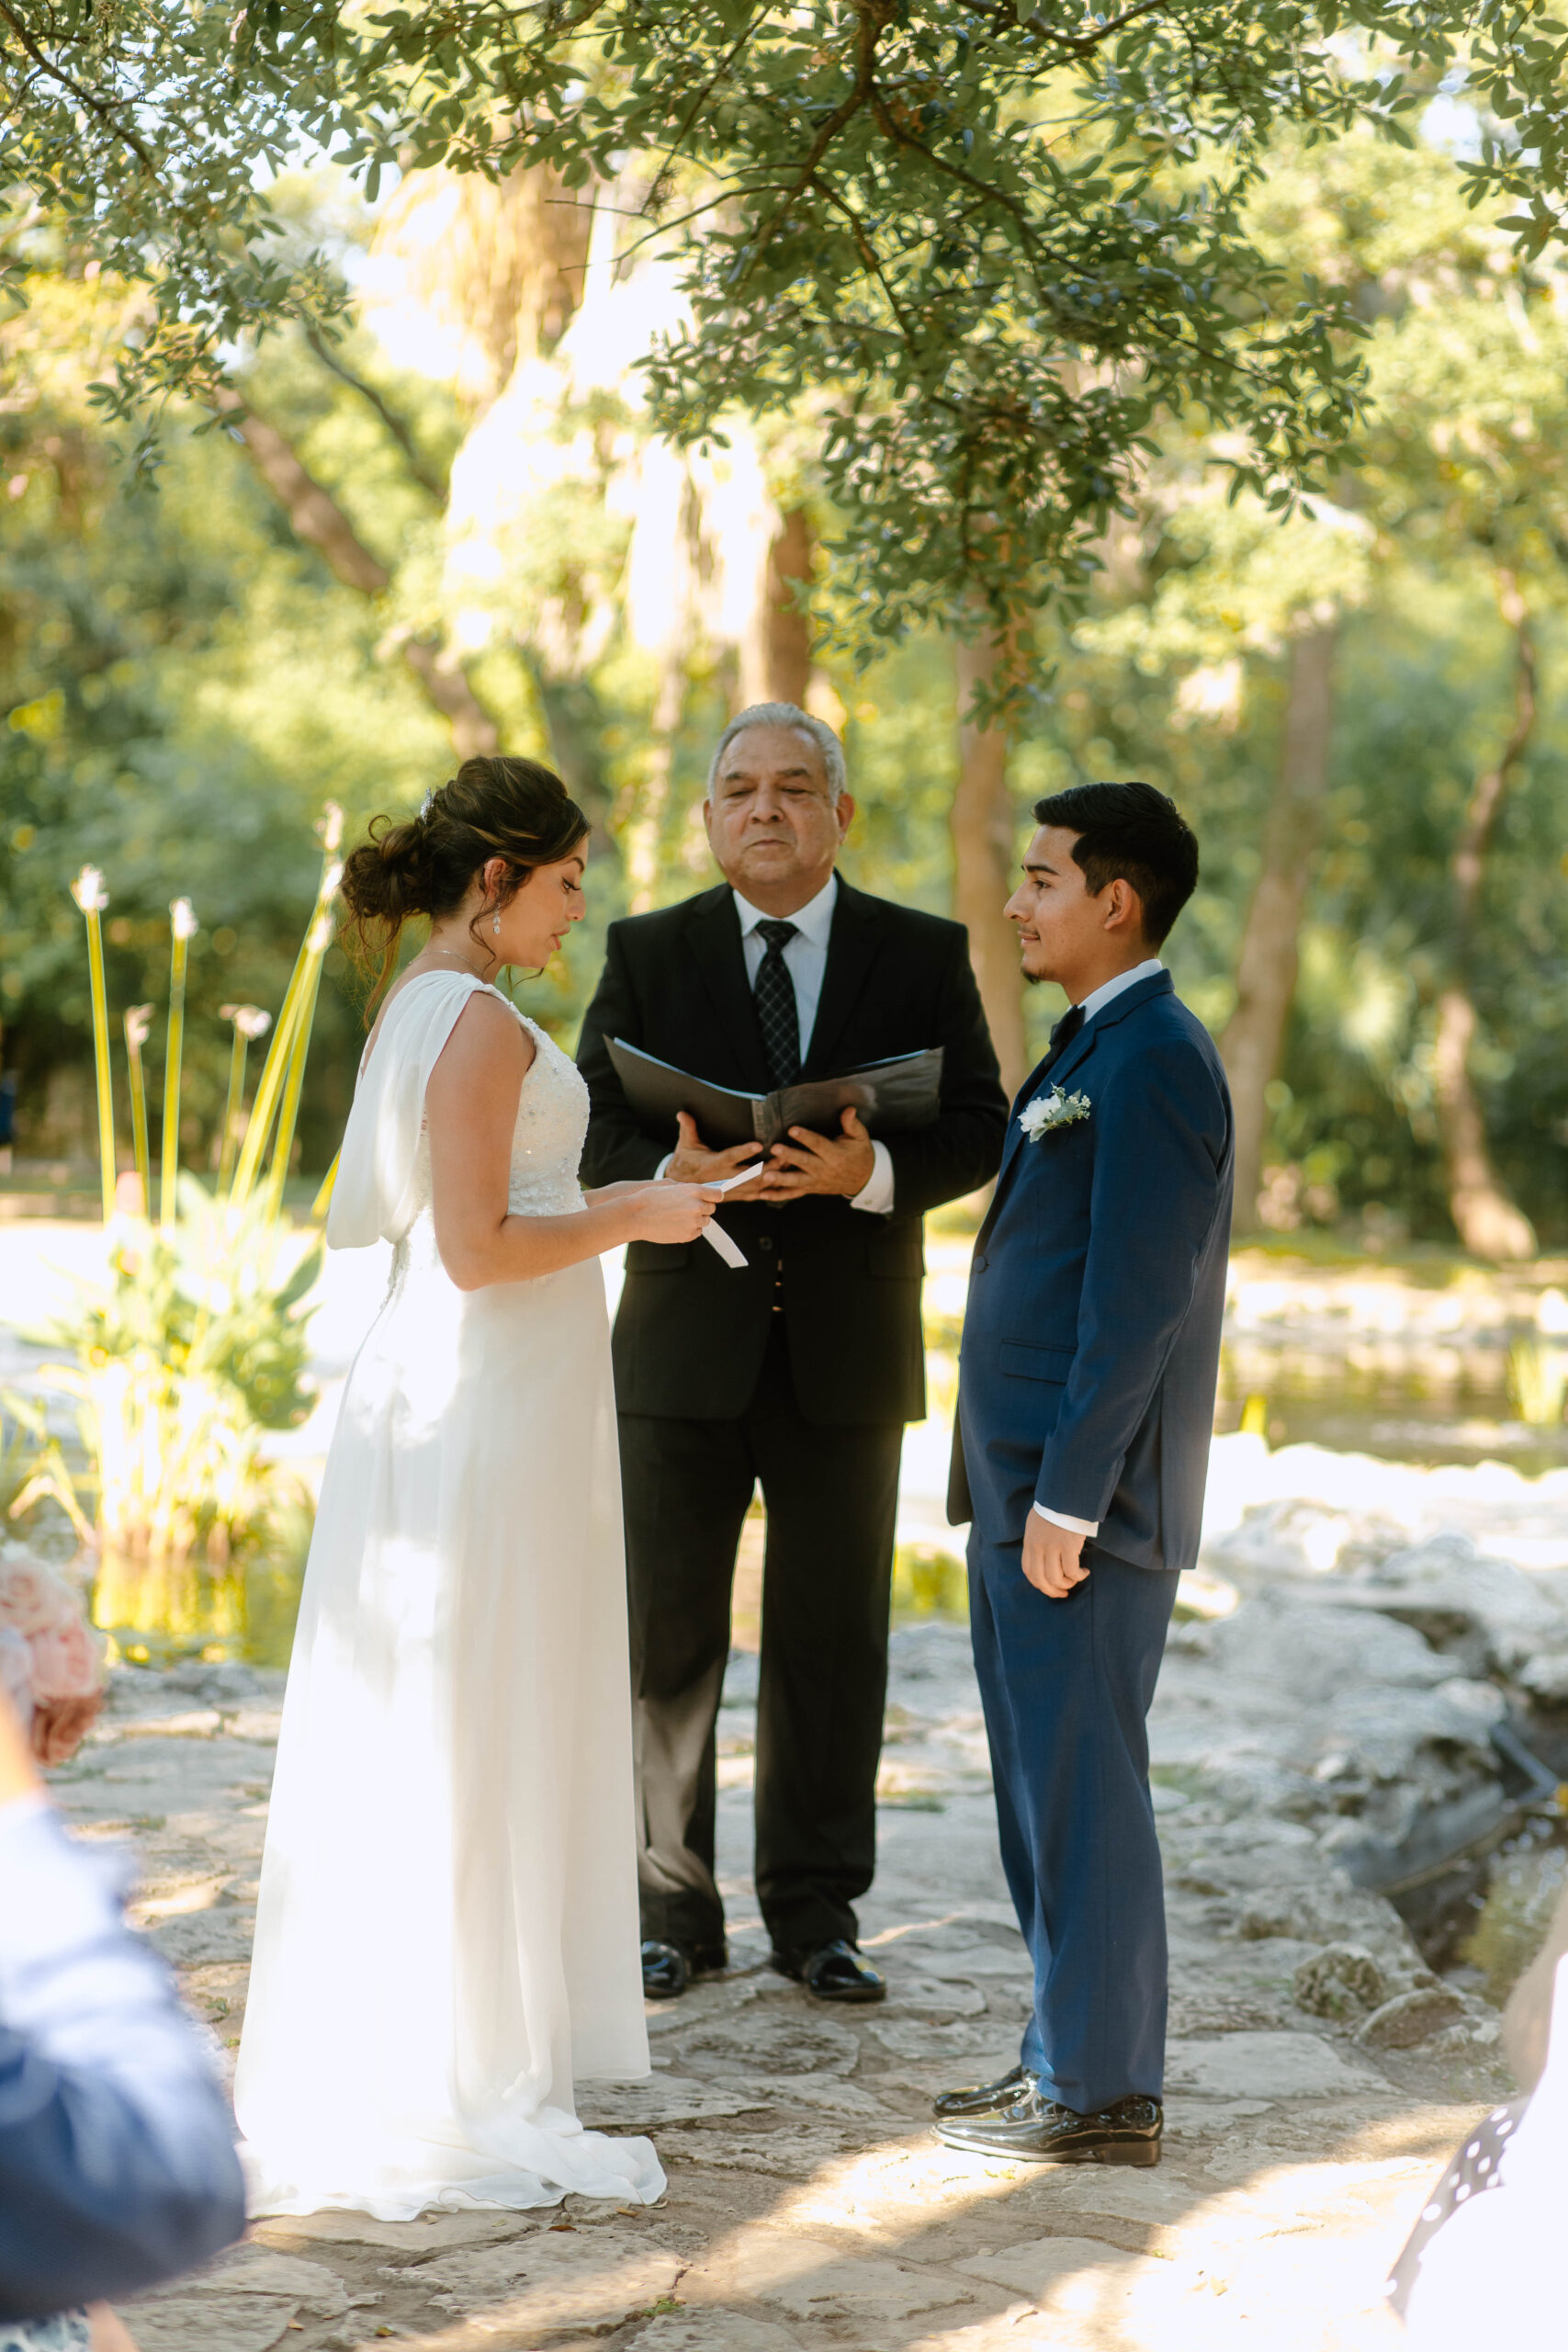 Couple exchanging vows at their Mayfield Garden Wedding in the summer. Mayfield Gardens is located in Austin, Texas.